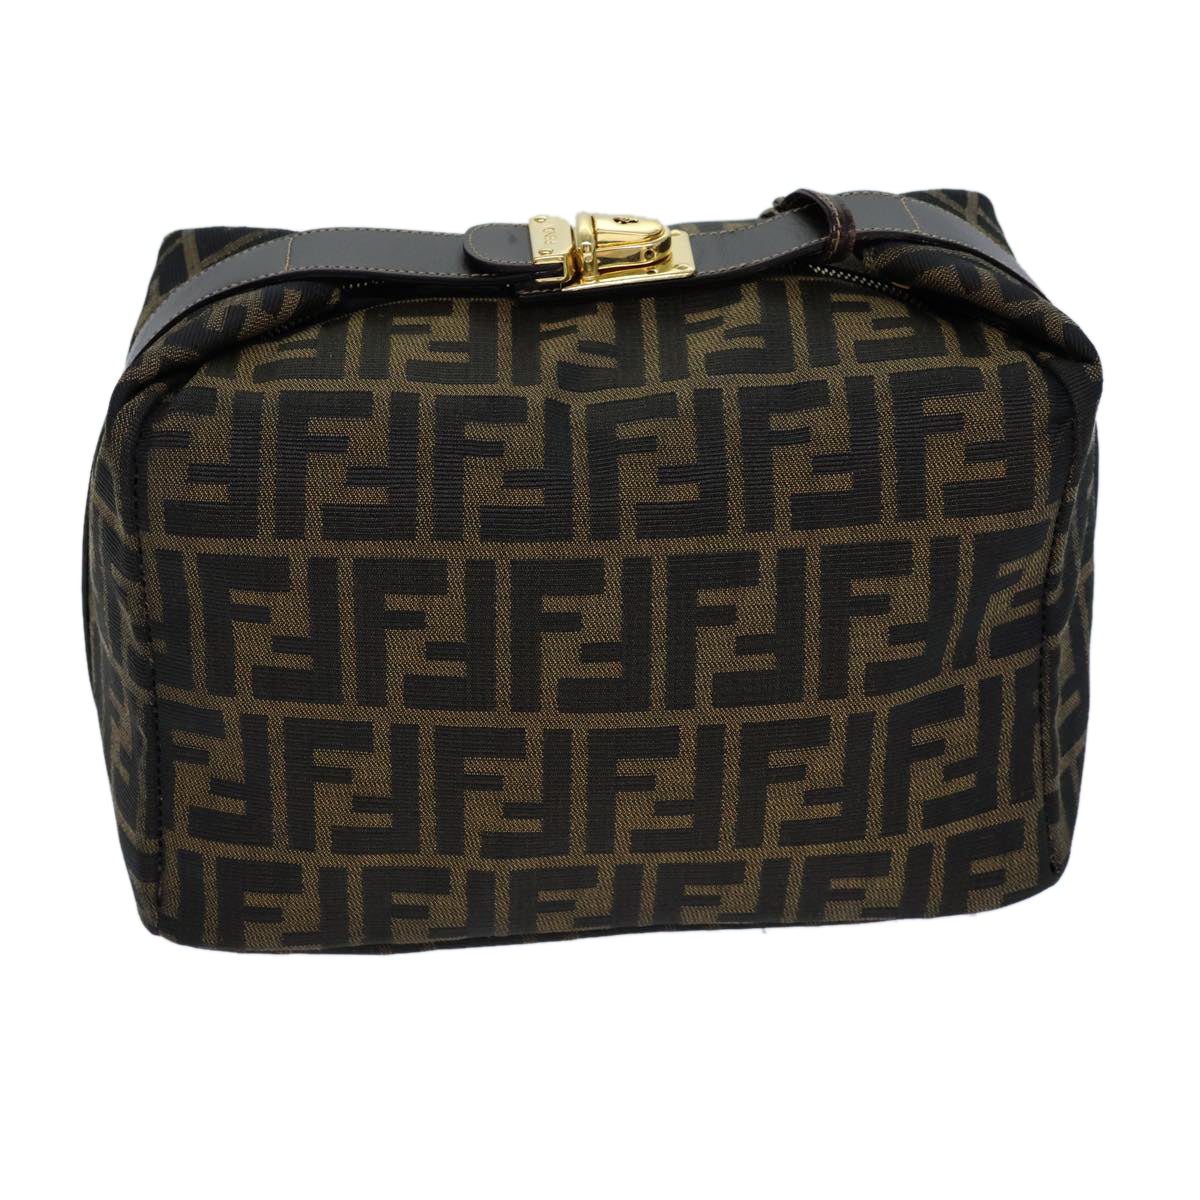 FENDI Zucca Canvas Vanity Cosmetic Pouch Brown Black Auth 72408 - 0